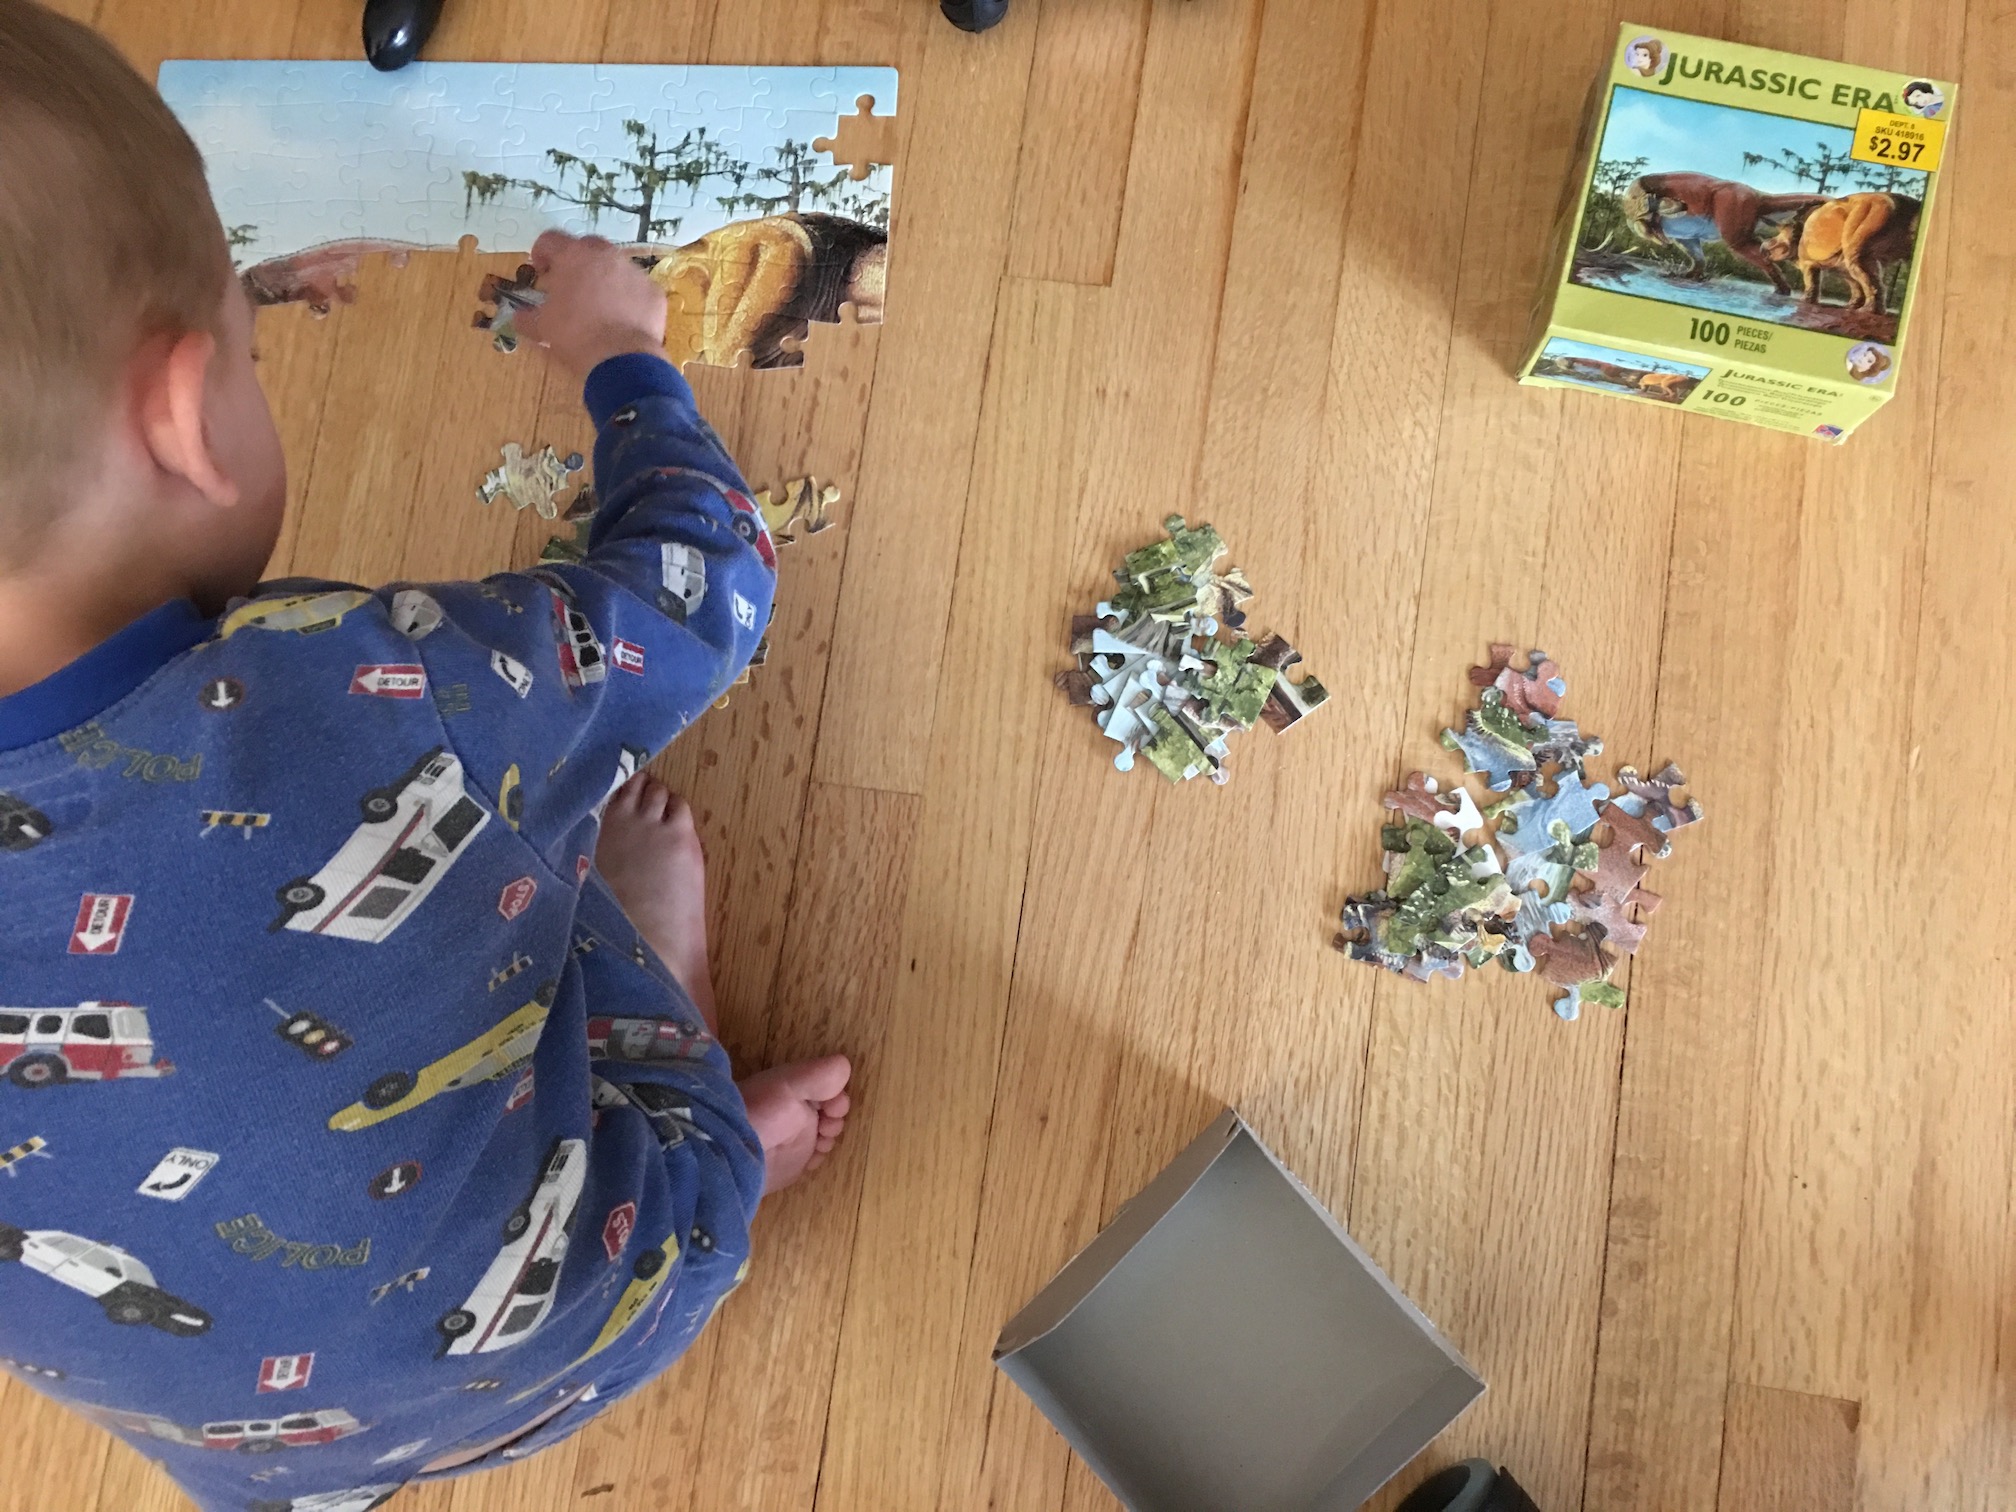 A young boy is putting together a puzzle from the jurassic era. Piles of sorted puzzle pieces sit beside him.